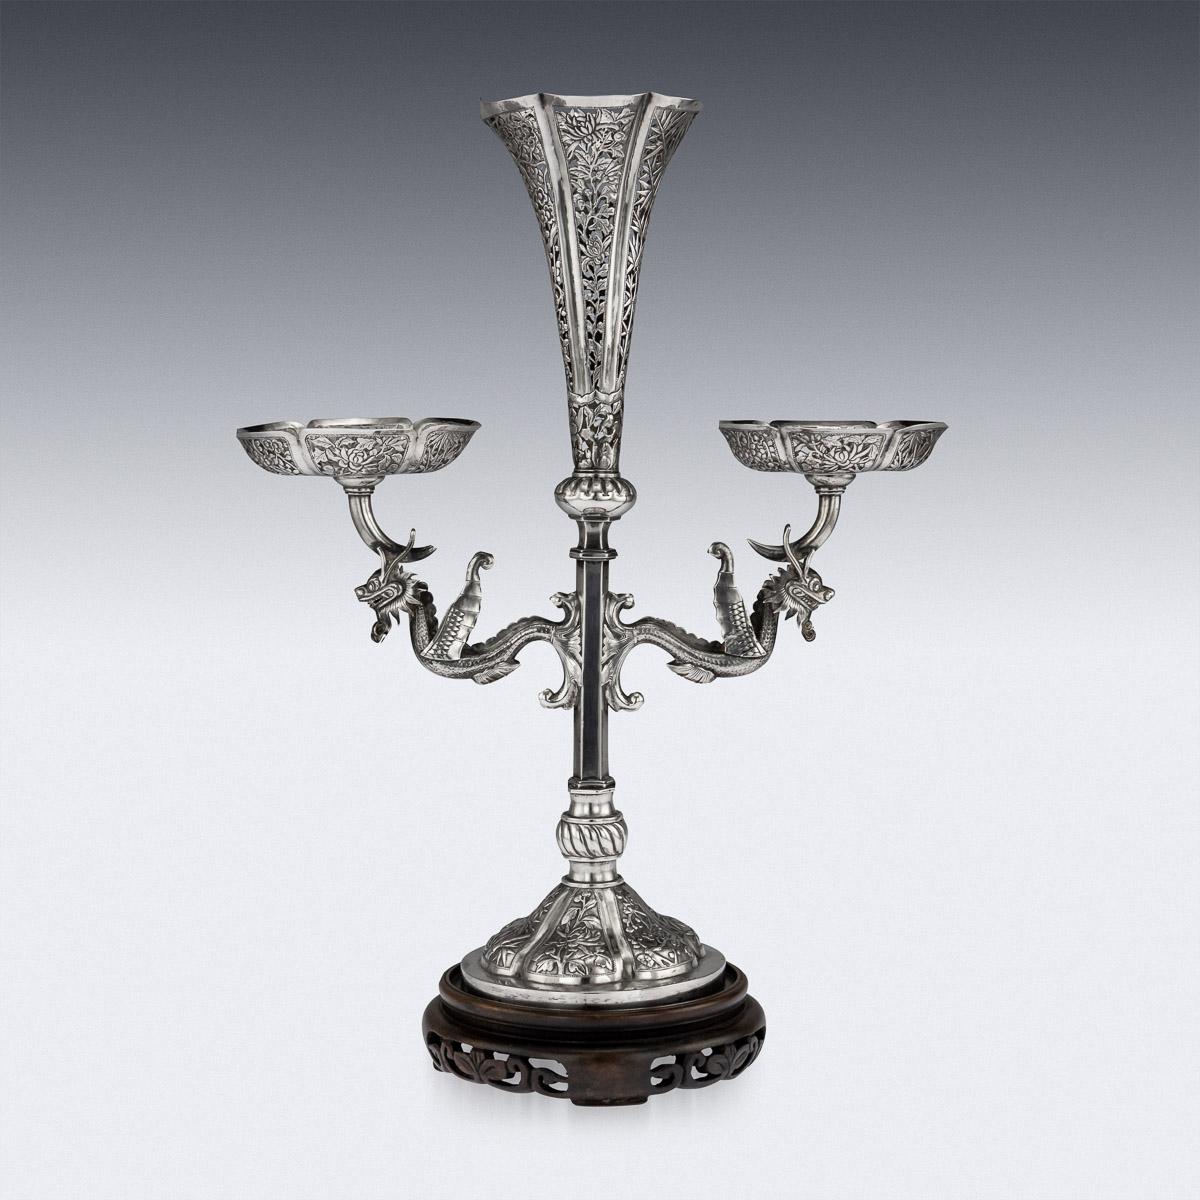 19th Century Chinese Export Solid Silver Dragon Epergne, Hung Chong & Co c 1890 For Sale 1